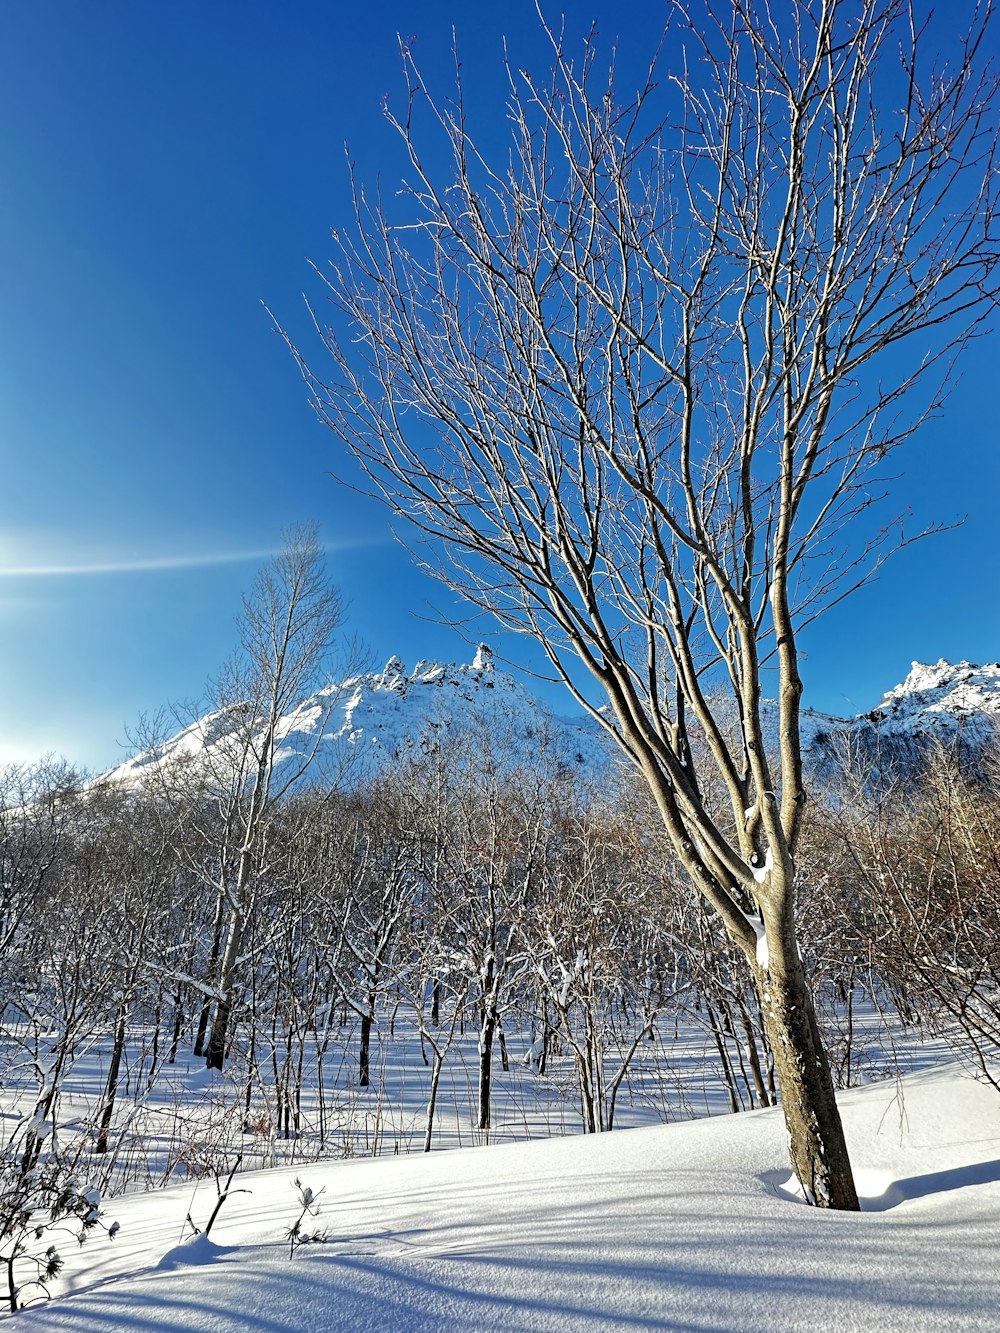 a bare tree in a snowy field with mountains in the background